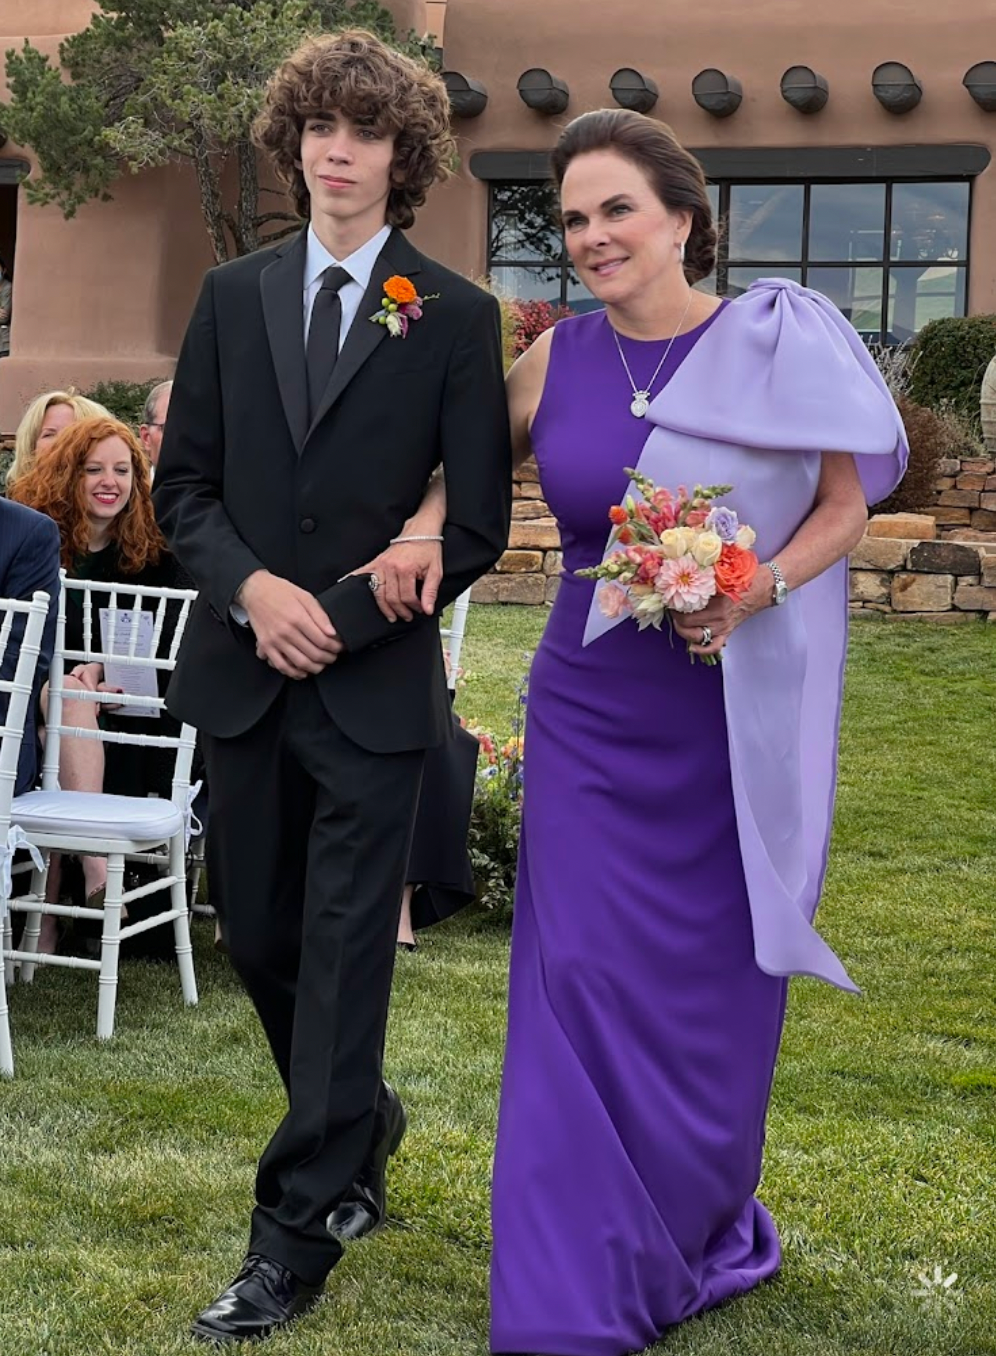 Mary Ann Detmering in her custom purple mother of the bride dress by David Peck walking down the aisle with a groomsmen